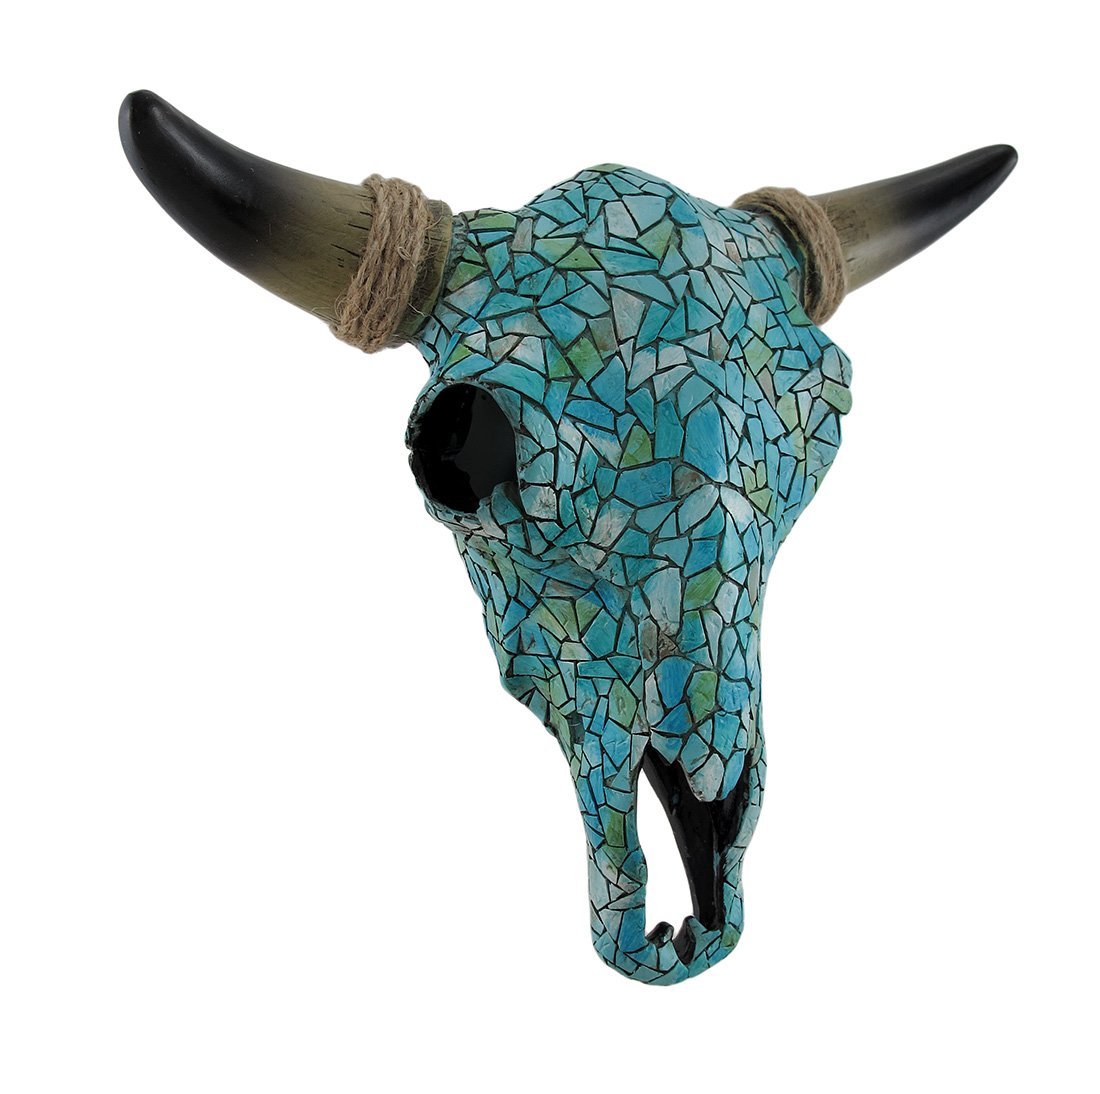 12428 Mosaic Turquoise Steer Skull Wall Hanging - 10.5 X 3.75 X 11.5 In.